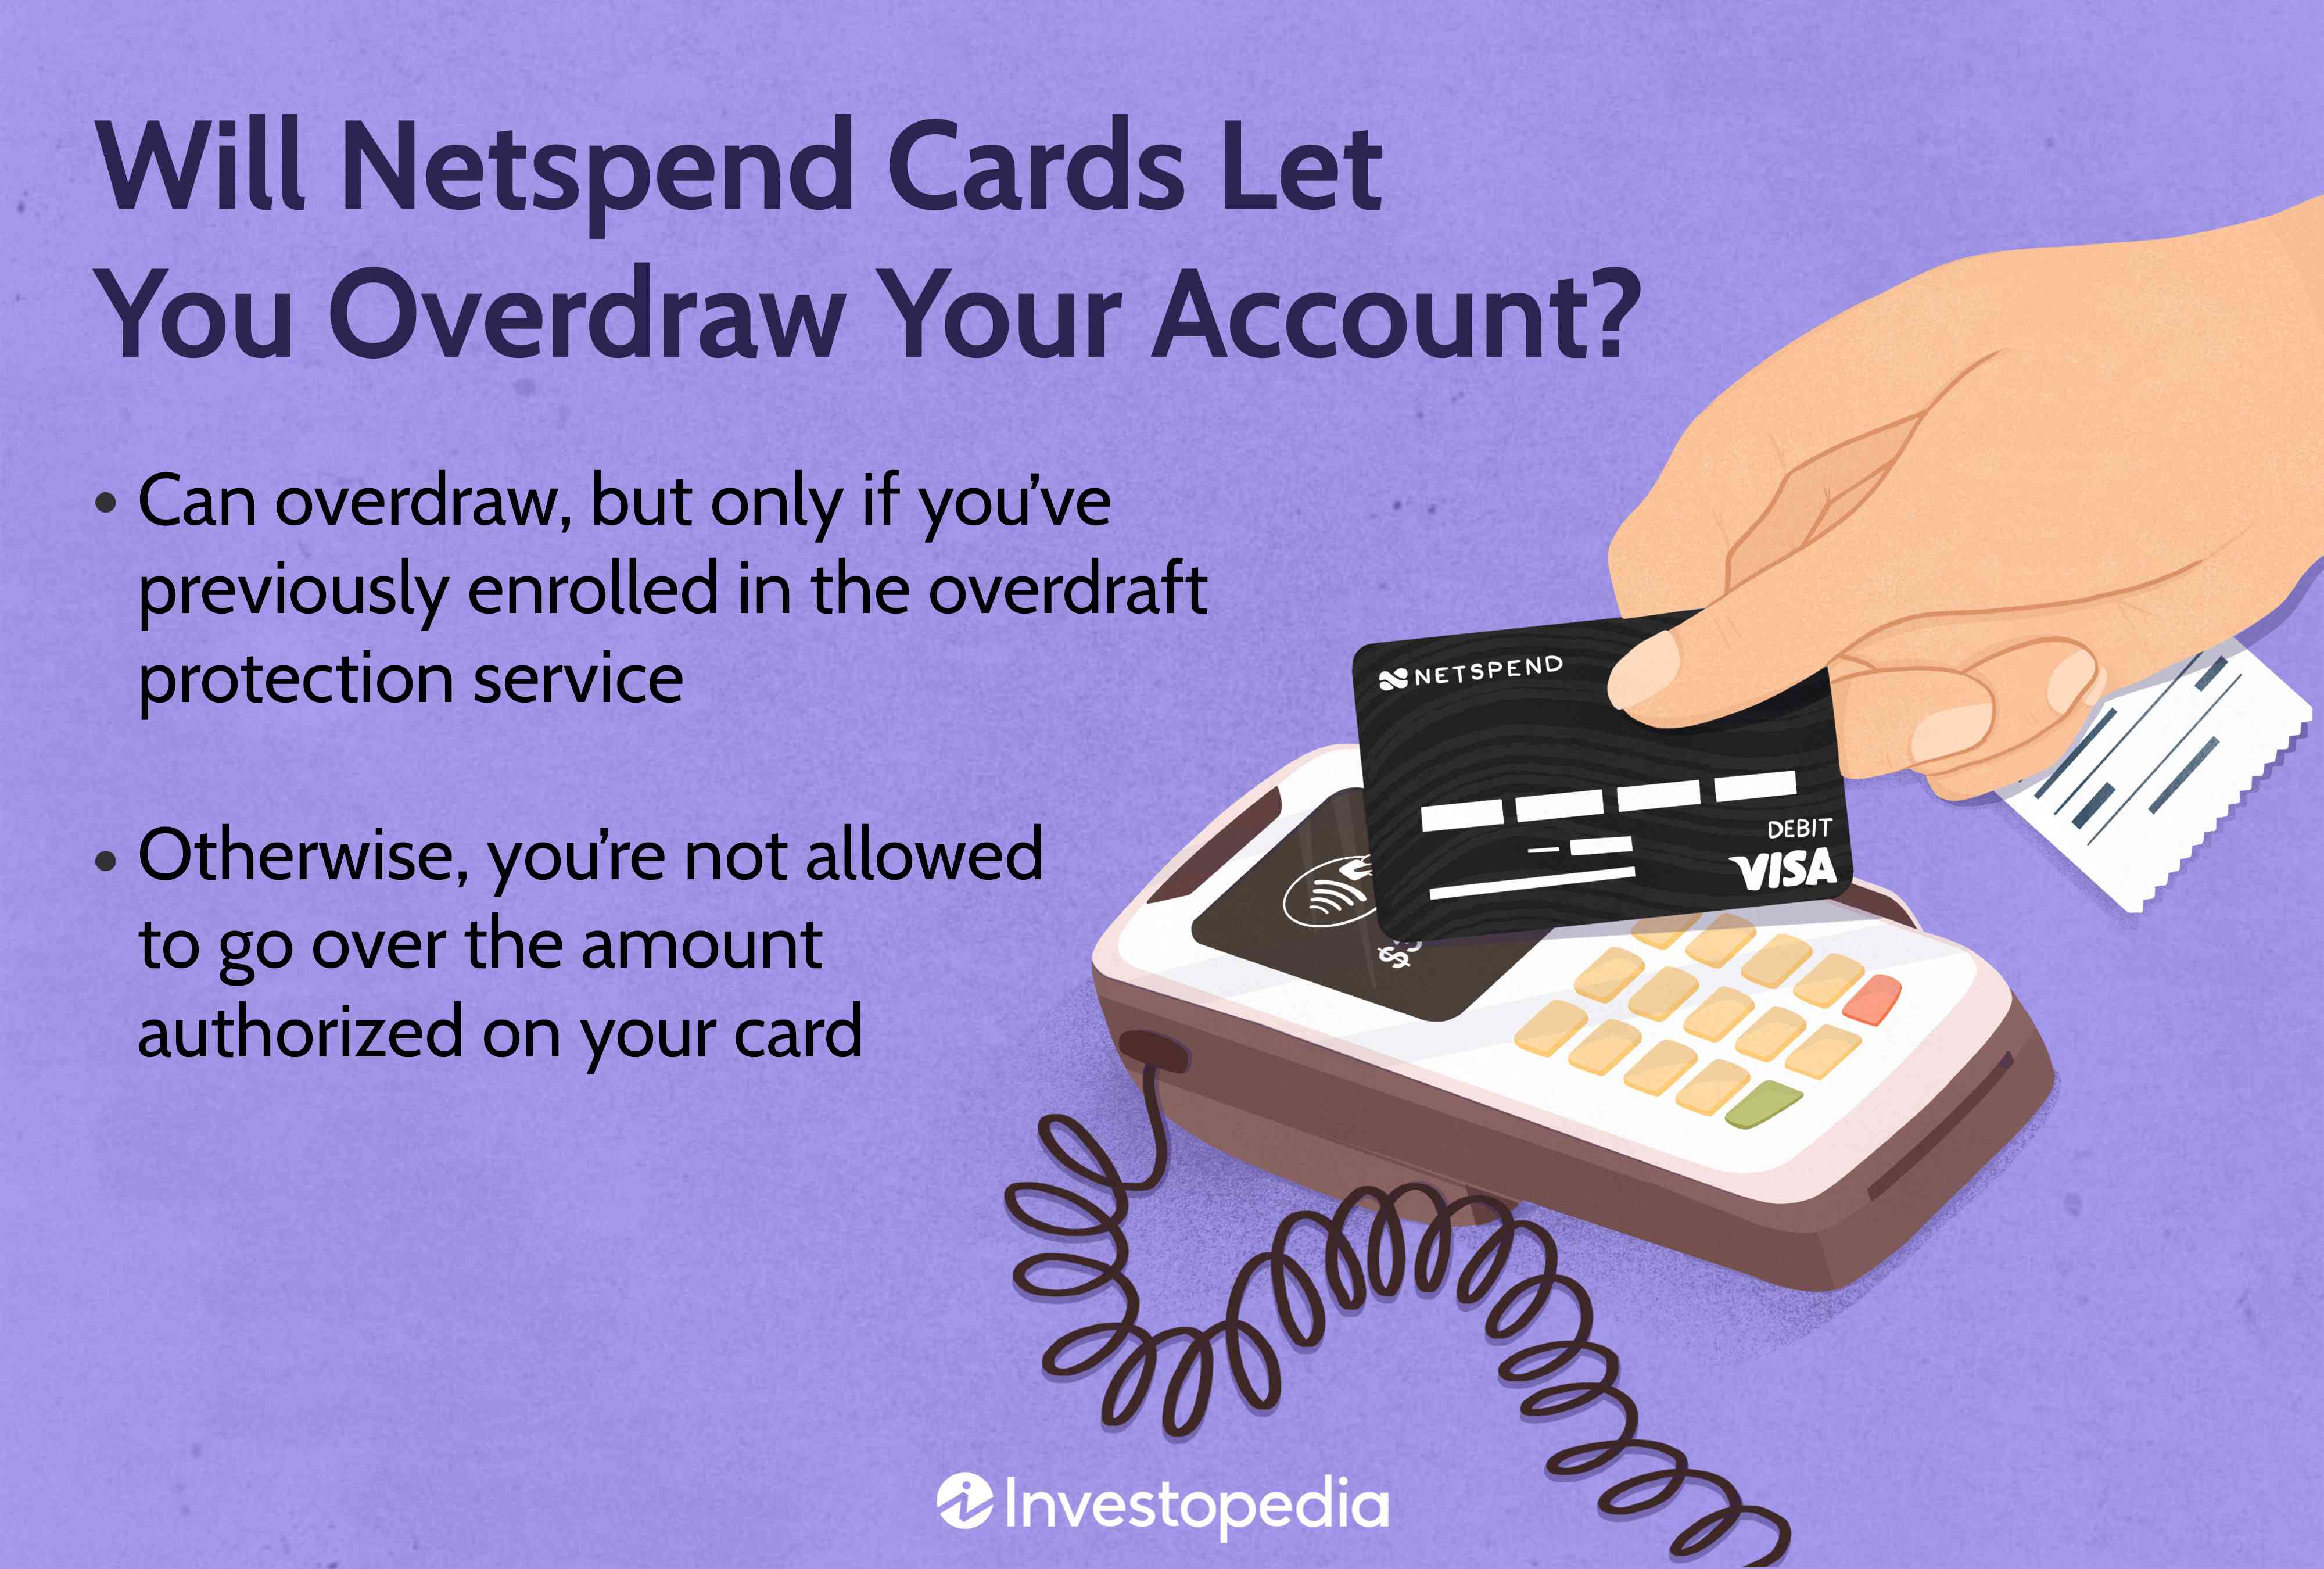 Will Netspend Cards Let You Overdraw Your Account